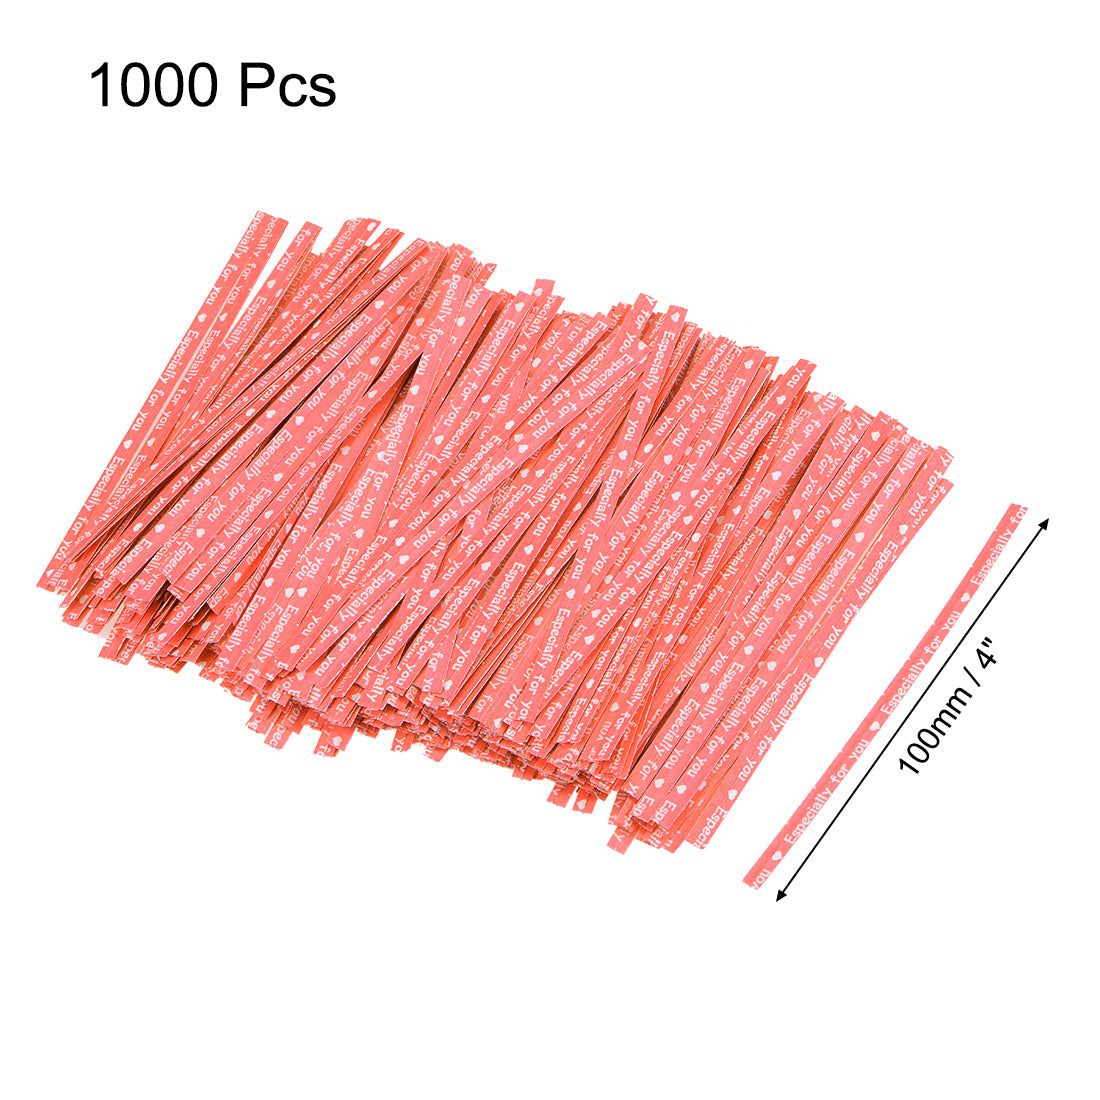 uxcell Uxcell Long Strong Twist Ties 4 Inches Quality  Closure Tie for Tying Gift Bags Art Craft Ties Manage Cords Red 1000pcs